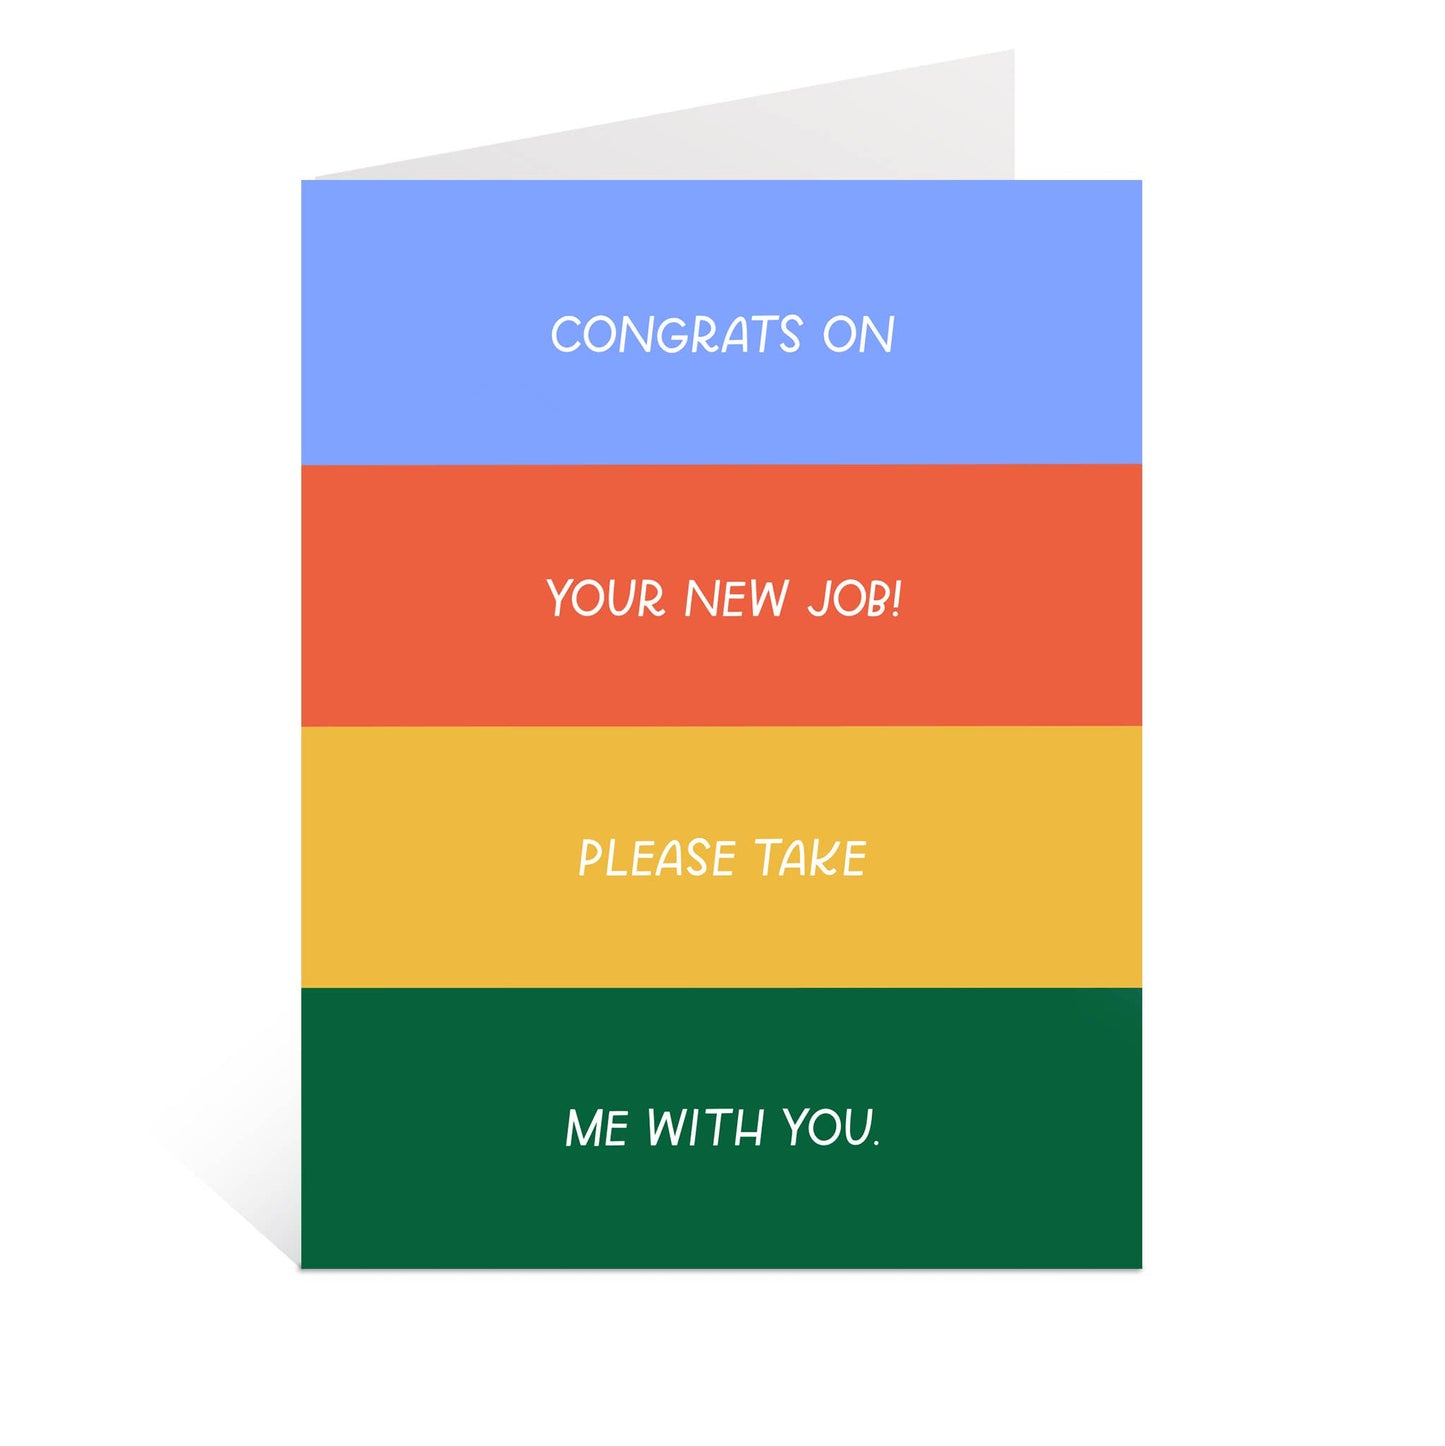 Congrats On Your New Job, Take Me With You Card | Funny Card